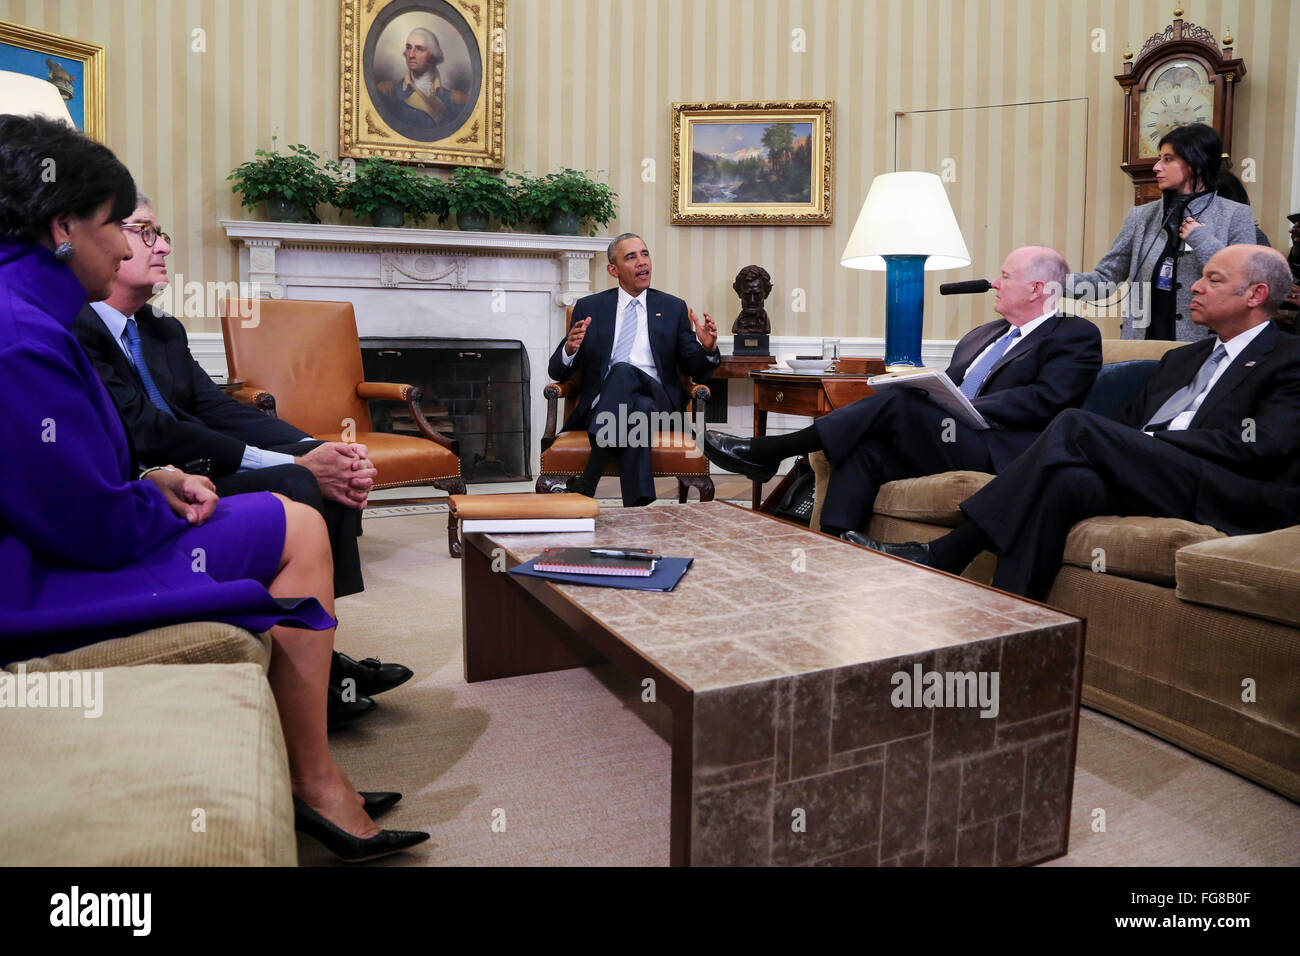 United States President Barack Obama meets with former National Security Advisor Tom Donilon (2R) and former IBM CEO Sam Palmisano (2L), who are being appointed as the Chair and Vice Chair respectively of the Commission on Enhancing National Cybersecurity in the Oval Office of the White House, in Washington, DC, February 17, 2016. Also present during this meeting are Commerce Secretary Penny Pritzker (L) and Secretary of Homeland Security Jeh Johnson (R). Credit: Aude Guerrucci/Pool via CNP - NO WIRE SERVICE - Stock Photo